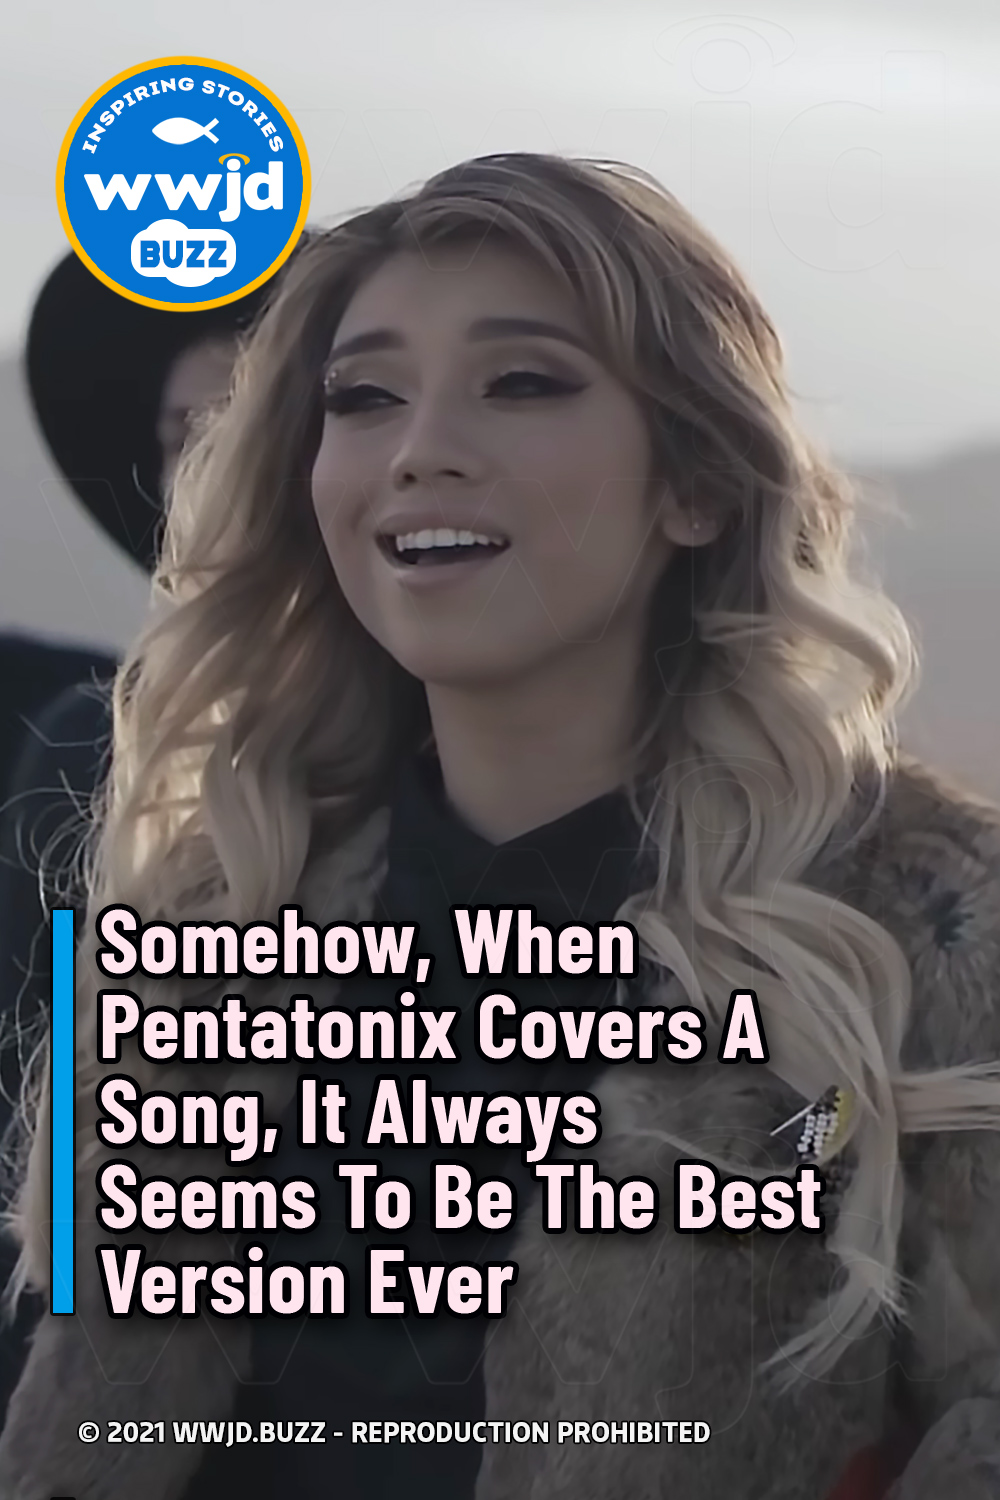 Somehow, When Pentatonix Covers A Song, It Always Seems To Be The Best Version Ever